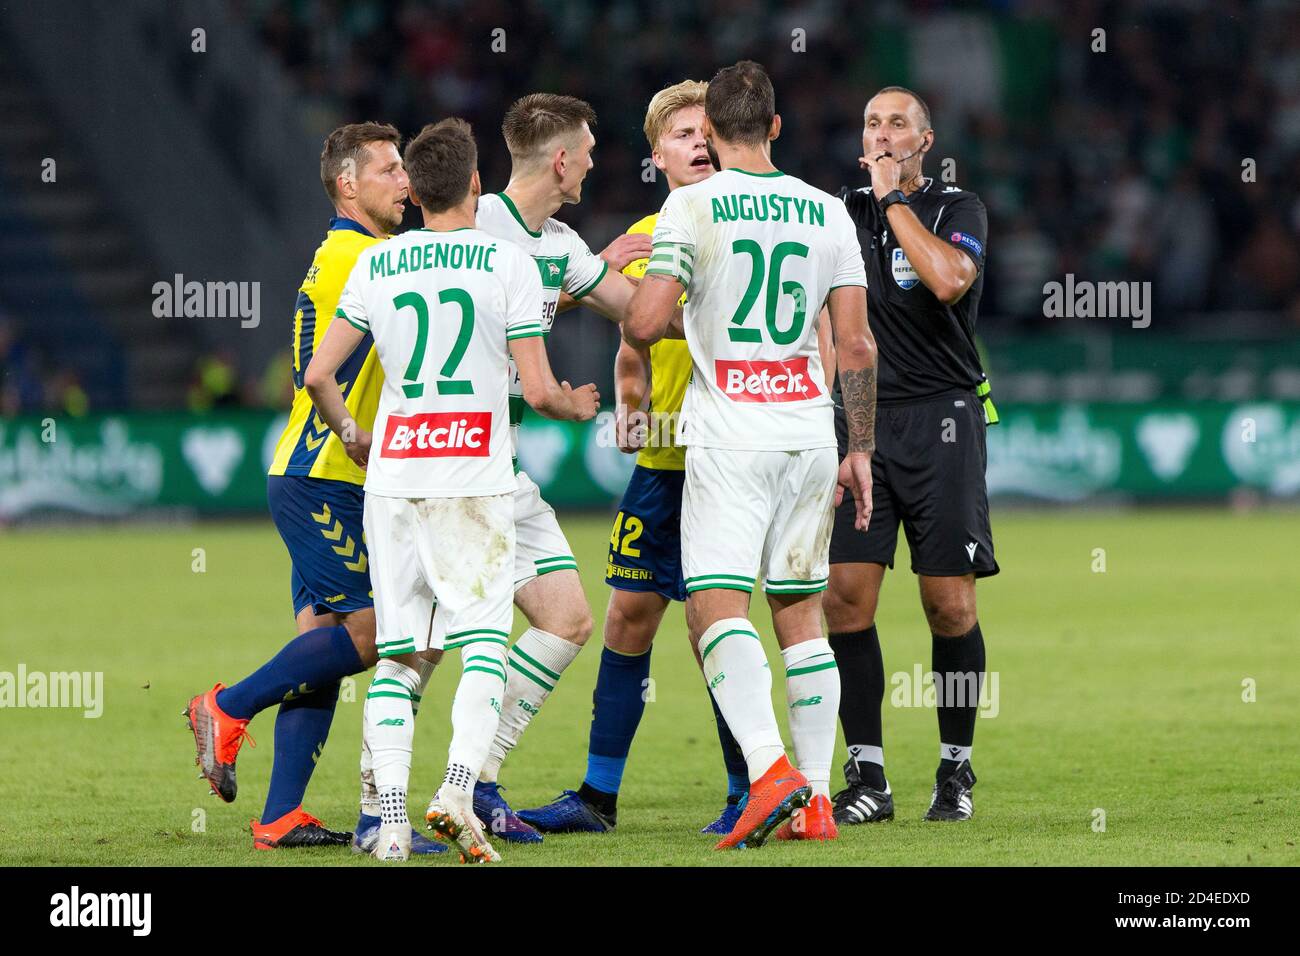 Brondby, Denmark. 01st, August 2019. Blazej Augustyn (26) and Filip Mladenovic of Lechia Gdanks and Tobias Borkeeiet (42) of Brondby IF seen during the UEFA Europa League qualification match between Brondby IF and Lechia Gdansk at Brondby Stadion, (Photo credit: Gonzales Photo - Thomas Rasmussen). Stock Photo